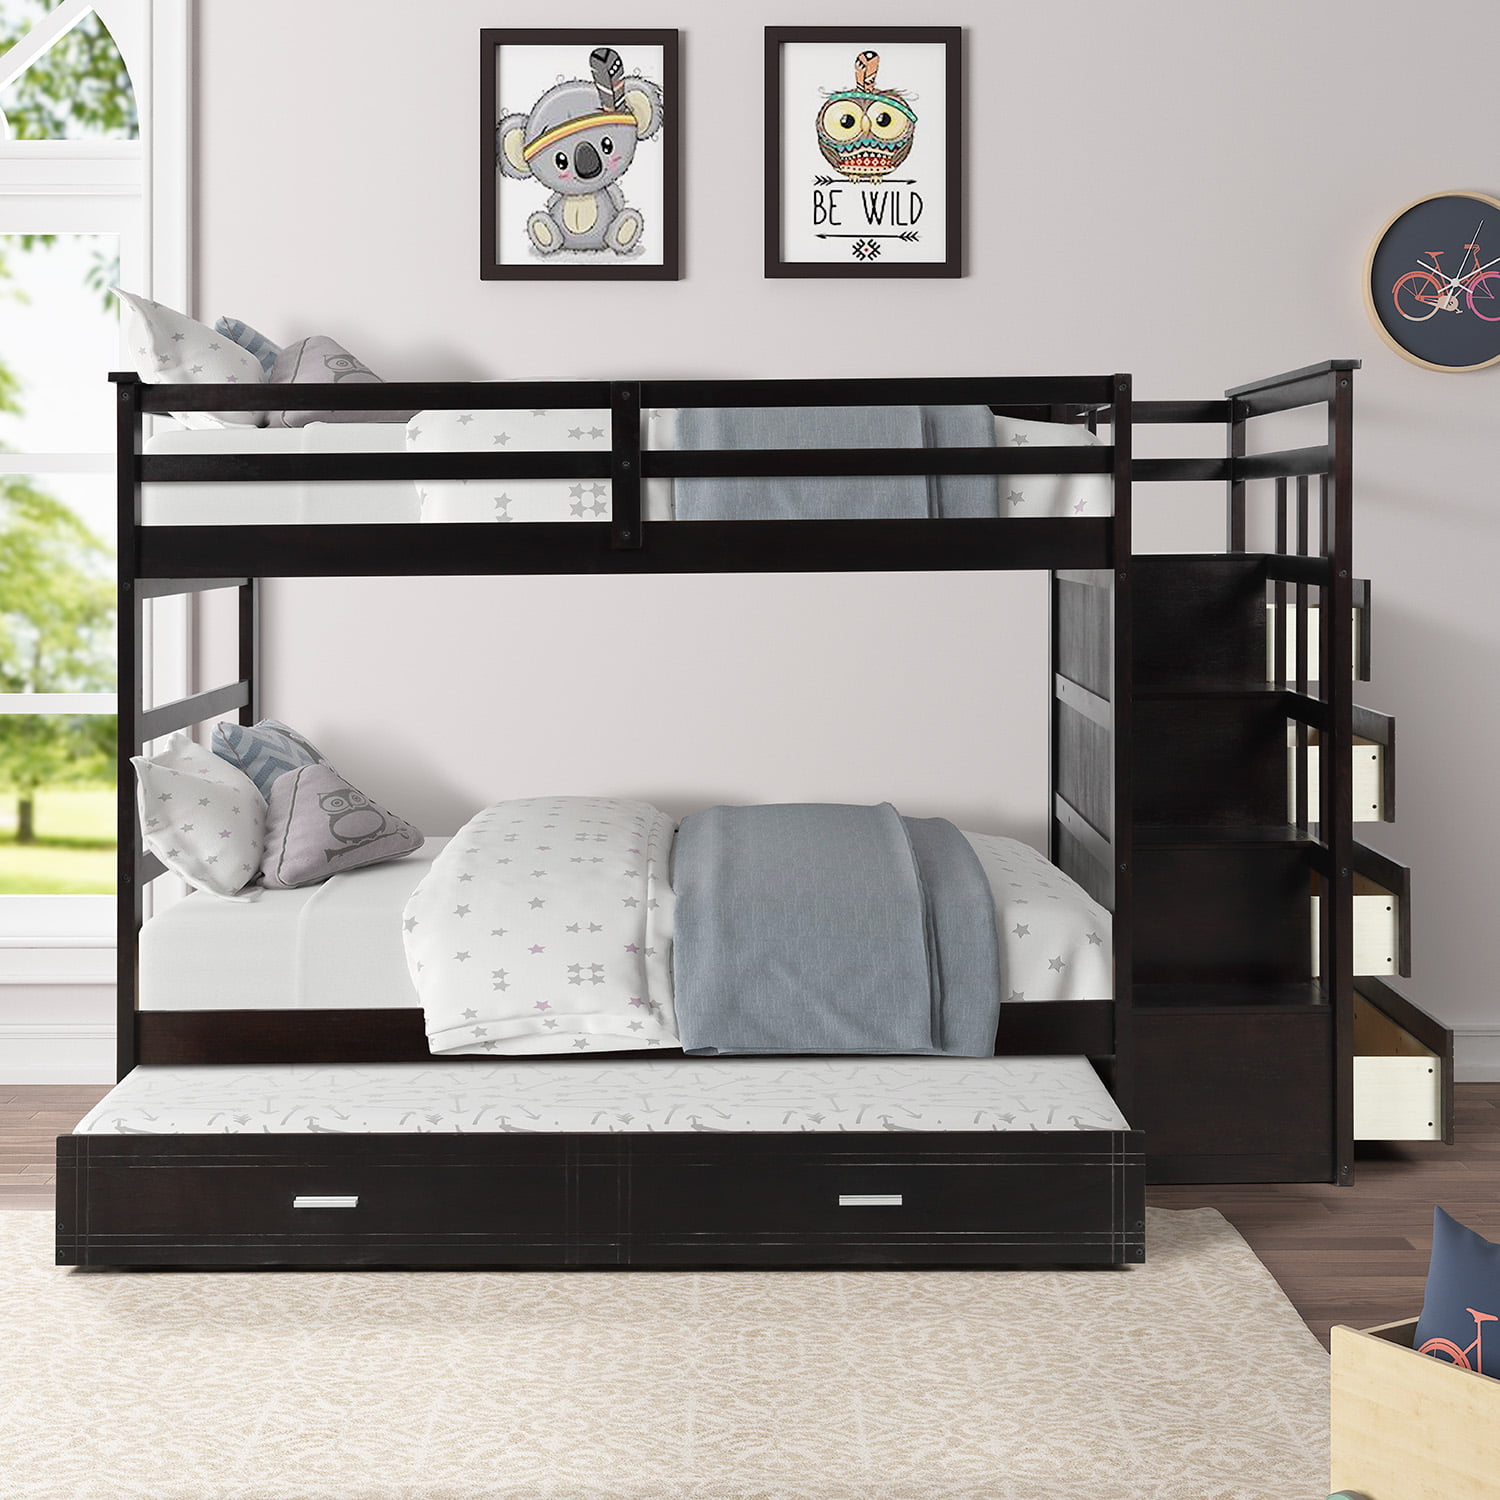 Wood Twin Over Bunk Beds For 3 12, Bunk Bed Safe For 4 Year Old